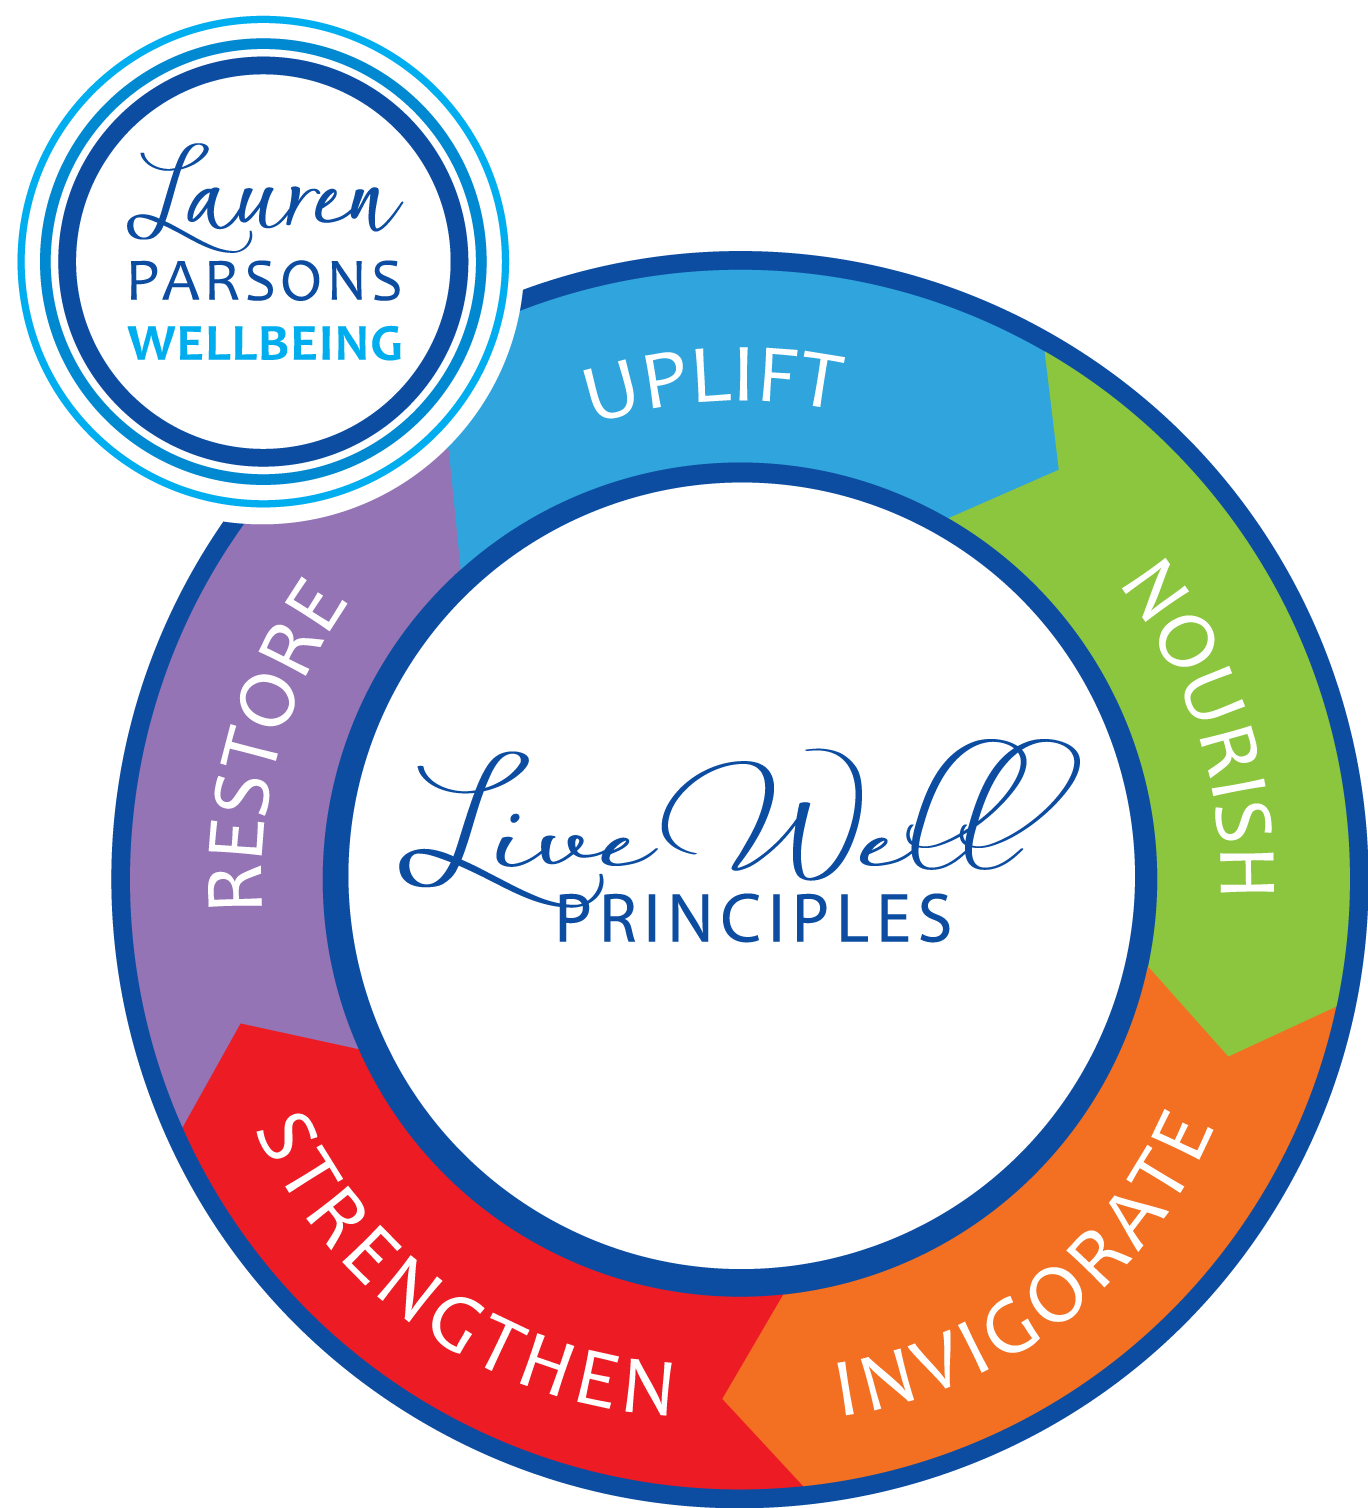 Lauren Parsons Wellbeing Specialist Live Well Principles for Workplace Wellbeing